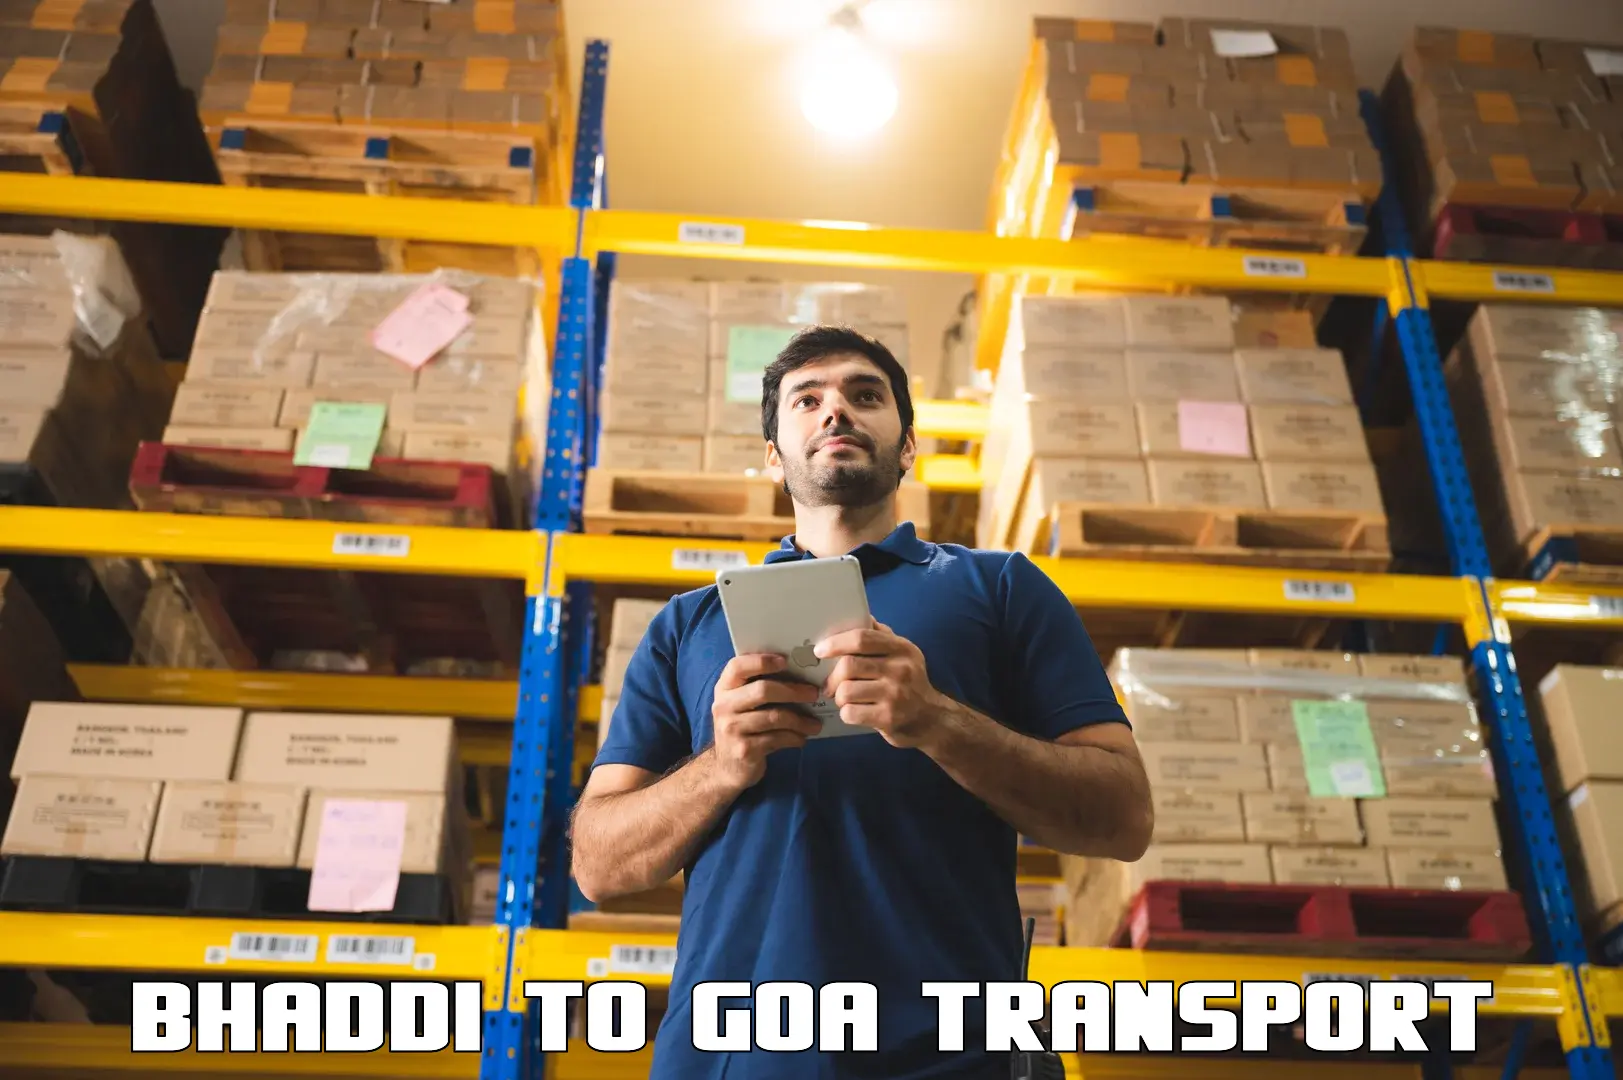 Air freight transport services Bhaddi to Goa